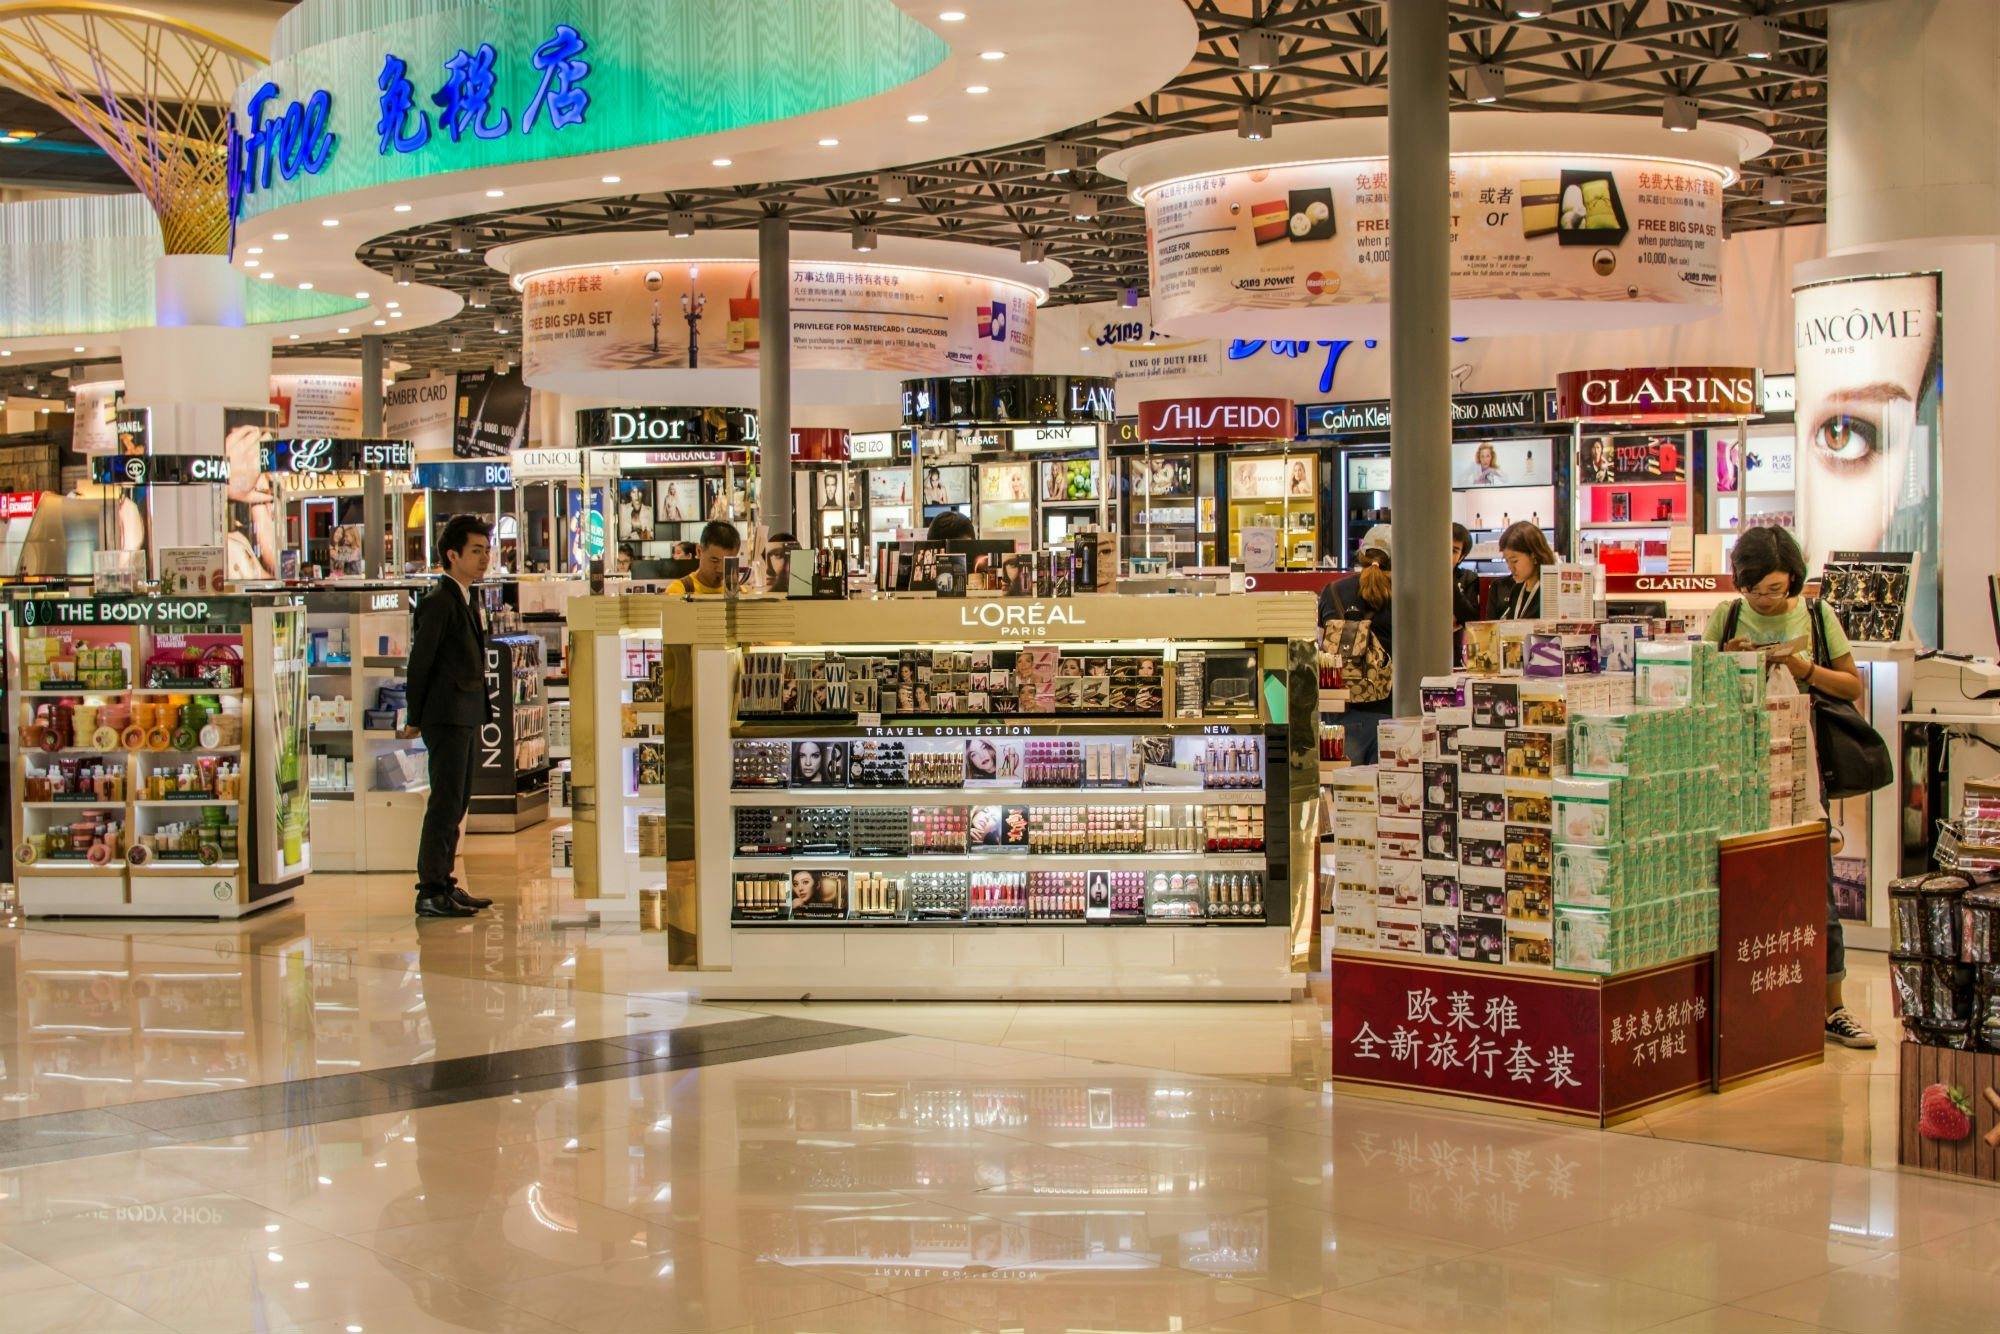 Duty-free stores in Asia are quickly expanding and attracting the growing number of Chinese travelers. (SIHASAKPRACHUM/Shutterstock.com)